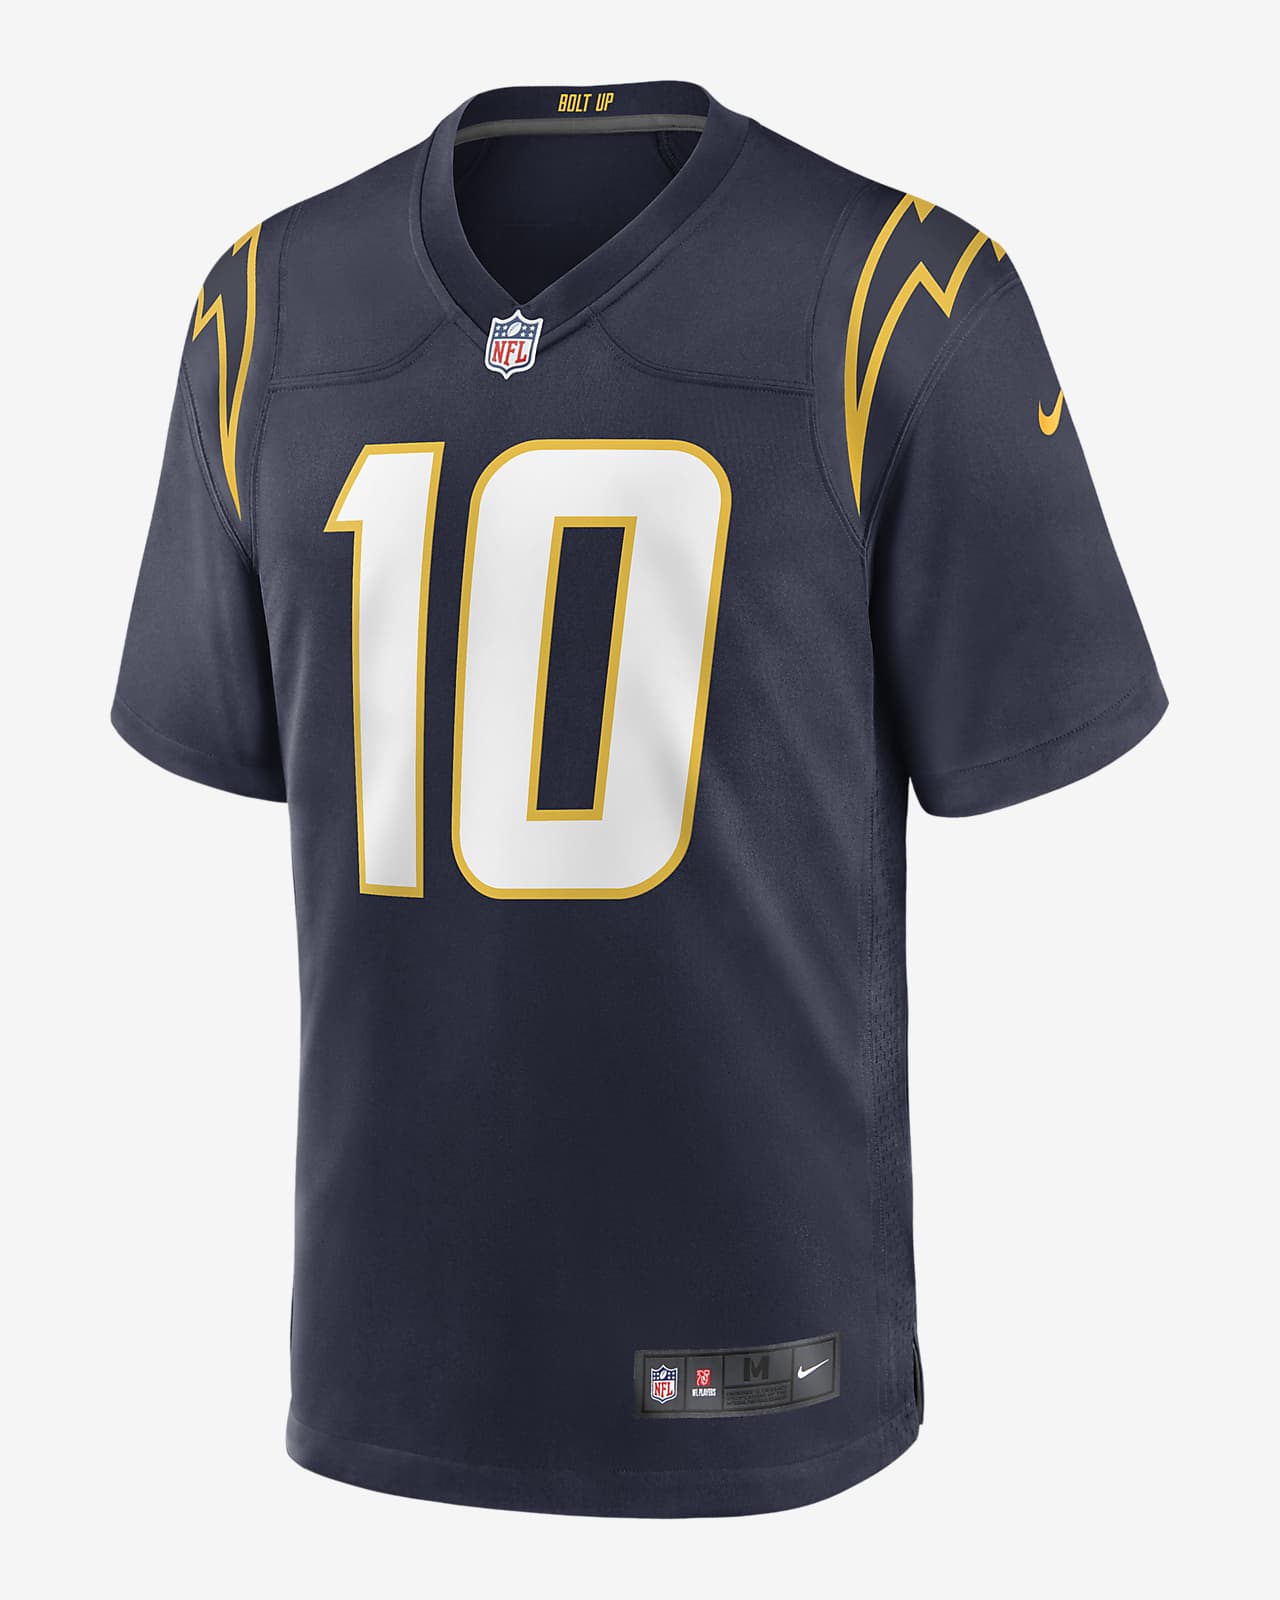 NFL Los Angeles Chargers (Justin Herbert) Men's Game Football Jersey.